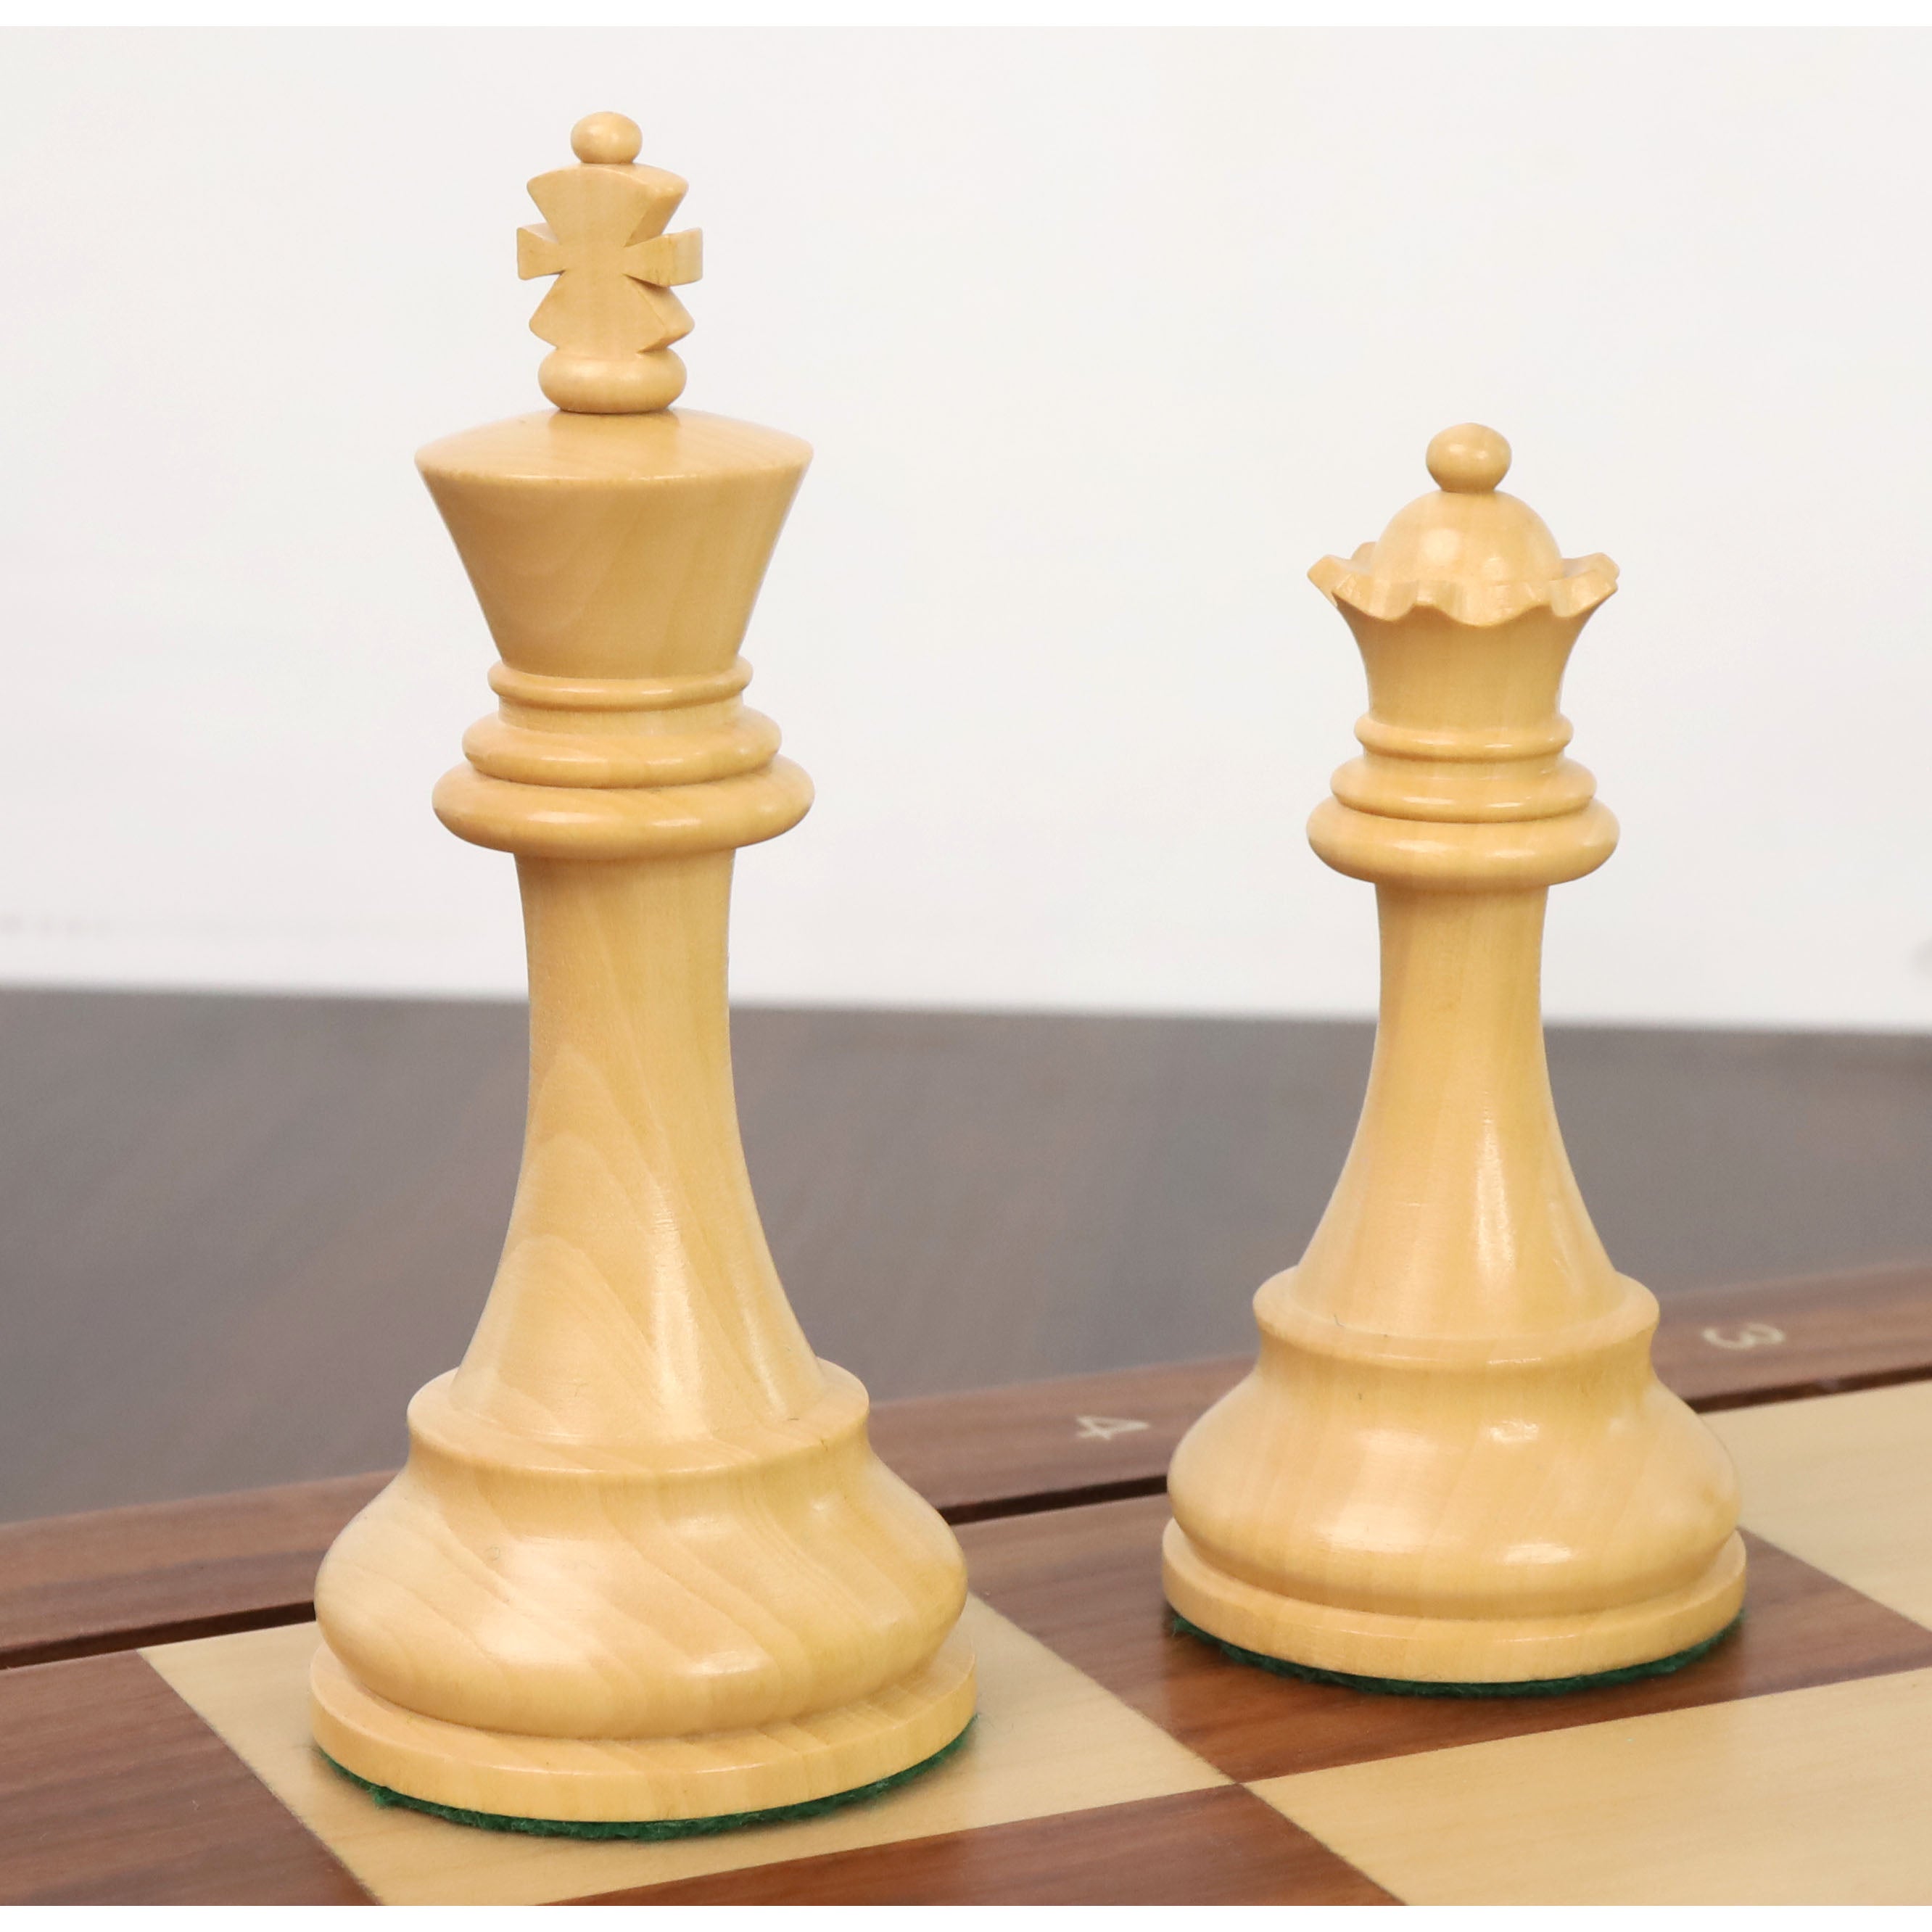 4.1" New Classic Staunton Wooden Chess Pieces Only Set - Weighted Golden Rosewood